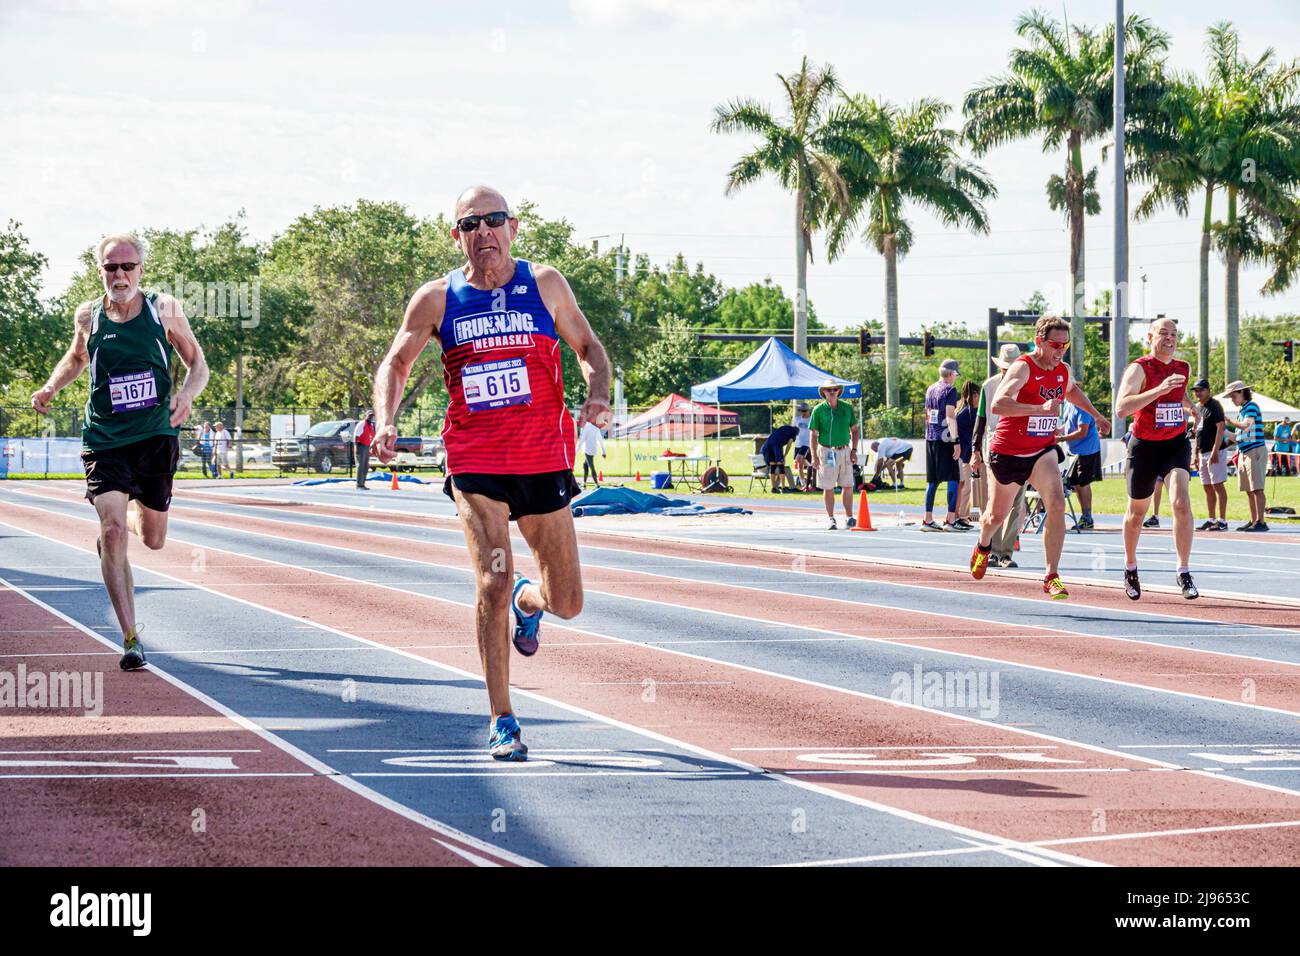 Fort Ft. Lauderdale Florida,Ansin Sports Complex Track & Field National Senior Games,seniors men runners running racing competitors competing Stock Photo